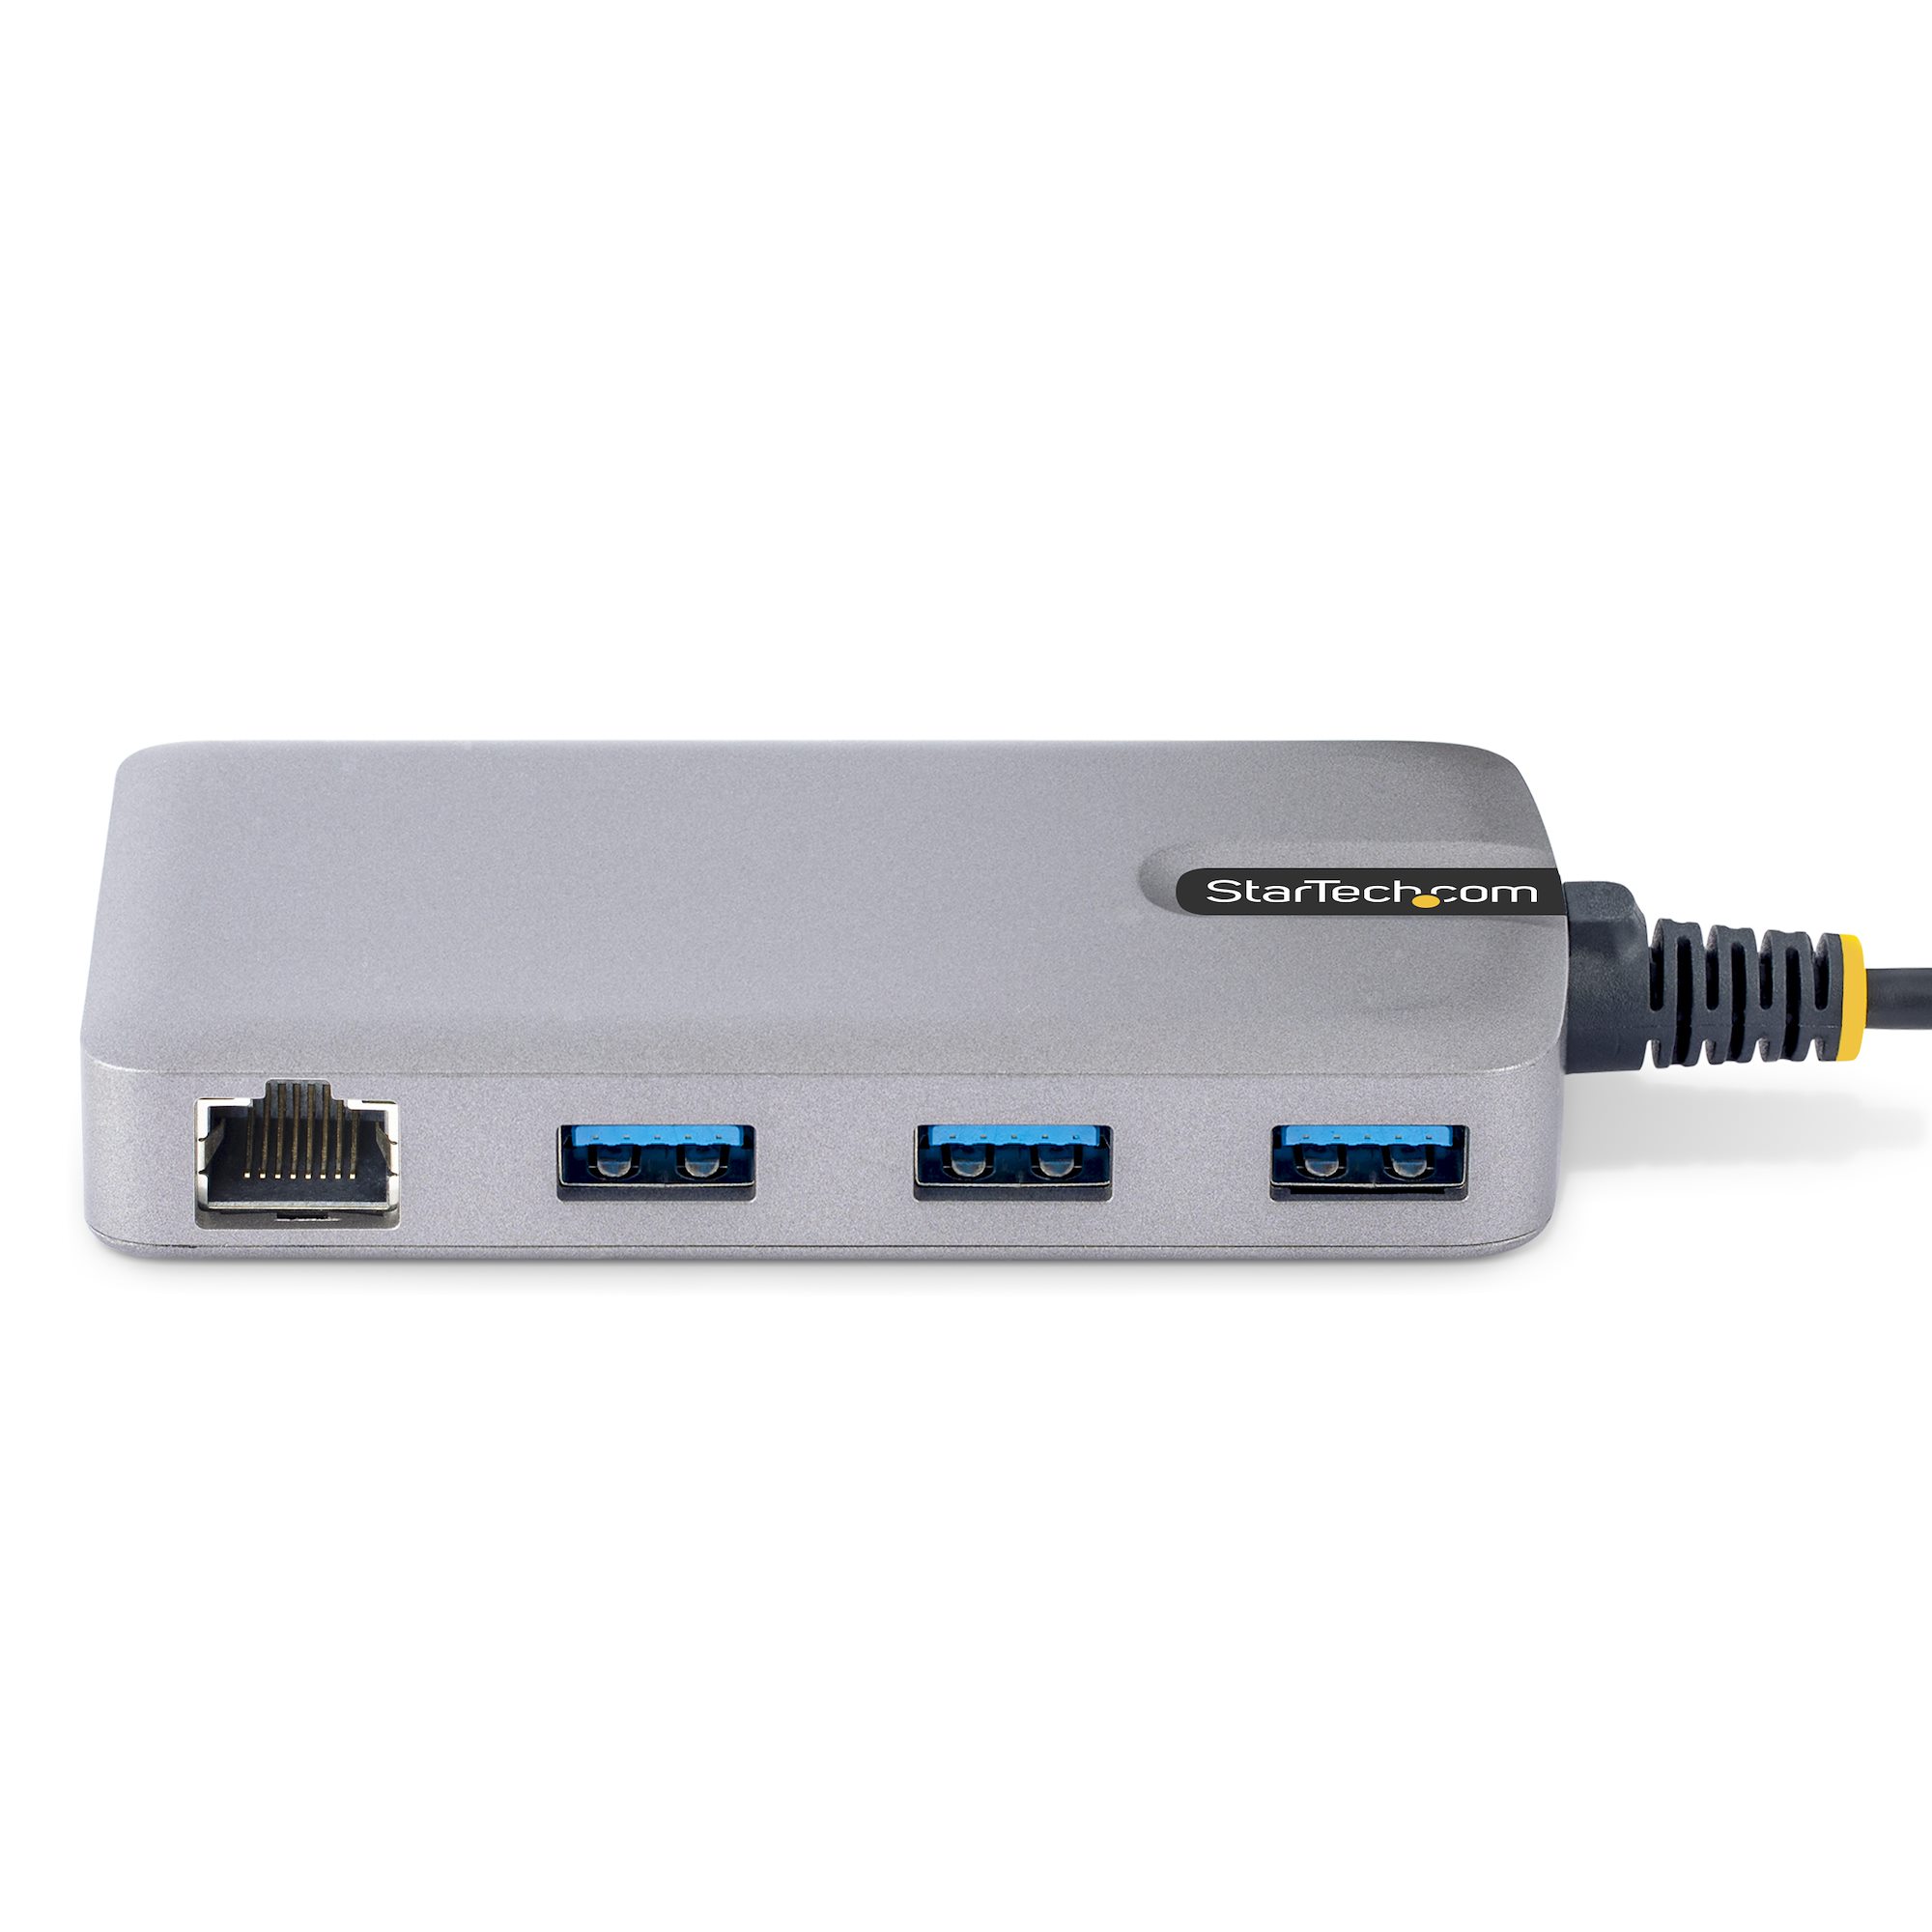 StarTech.com 3-Port USB-C Hub with Ethernet, 3x USB-A Ports, Gigabit  Ethernet, USB 3.0 5Gbps, Bus-Powered, USB Type-C Hub w/GbE and 1ft/30cm  Long Cable, Portable Laptop USB C Hub Adapter - USB Expansion